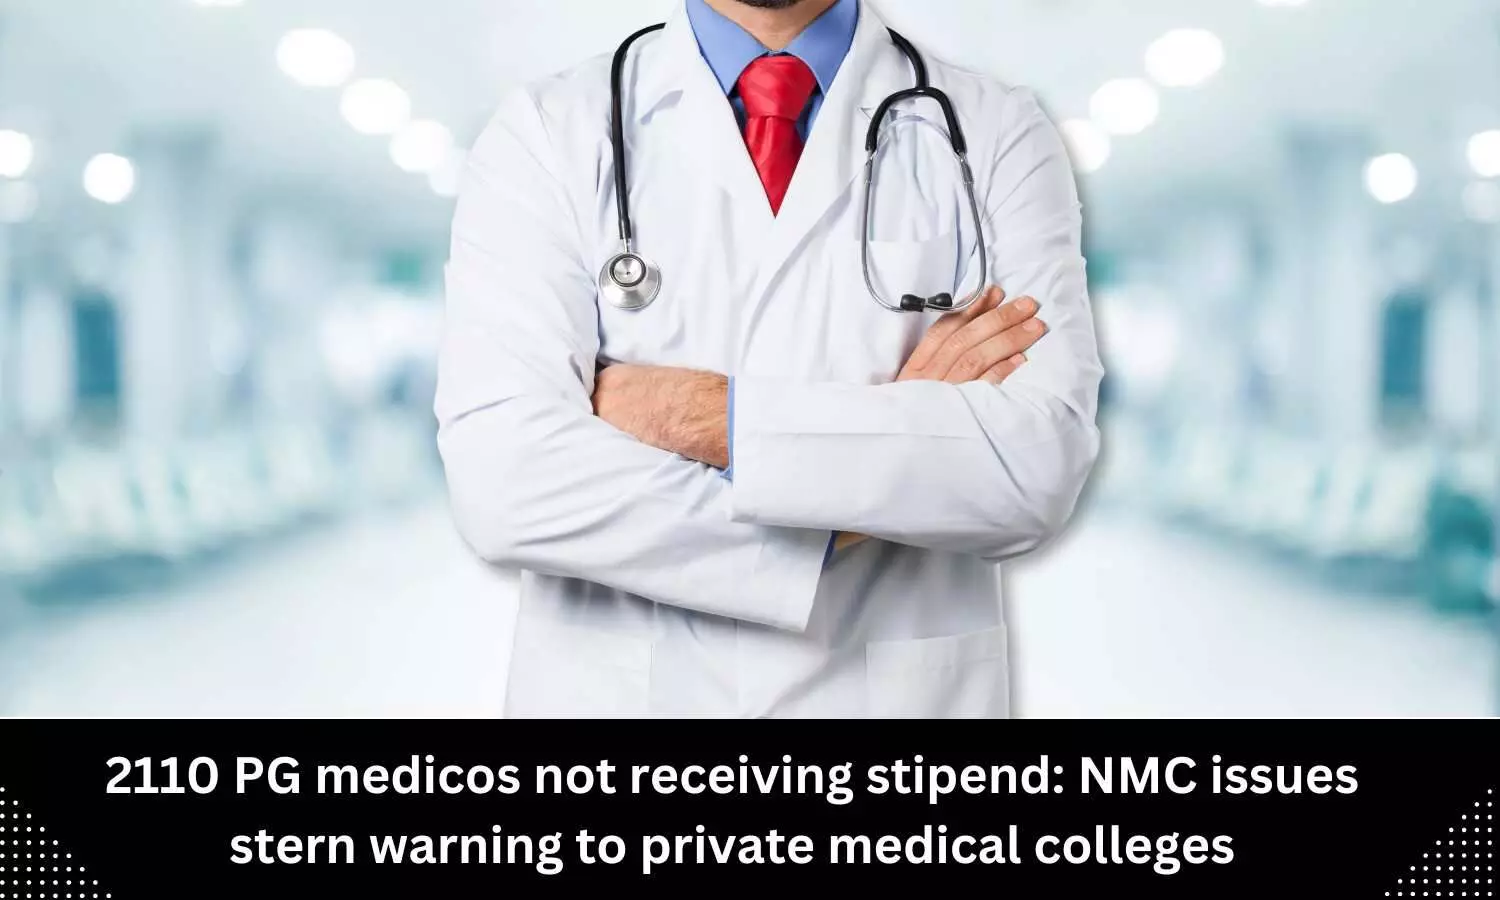 NMC warns private medical colleges over non payment of stipend to 2110 PG medicos